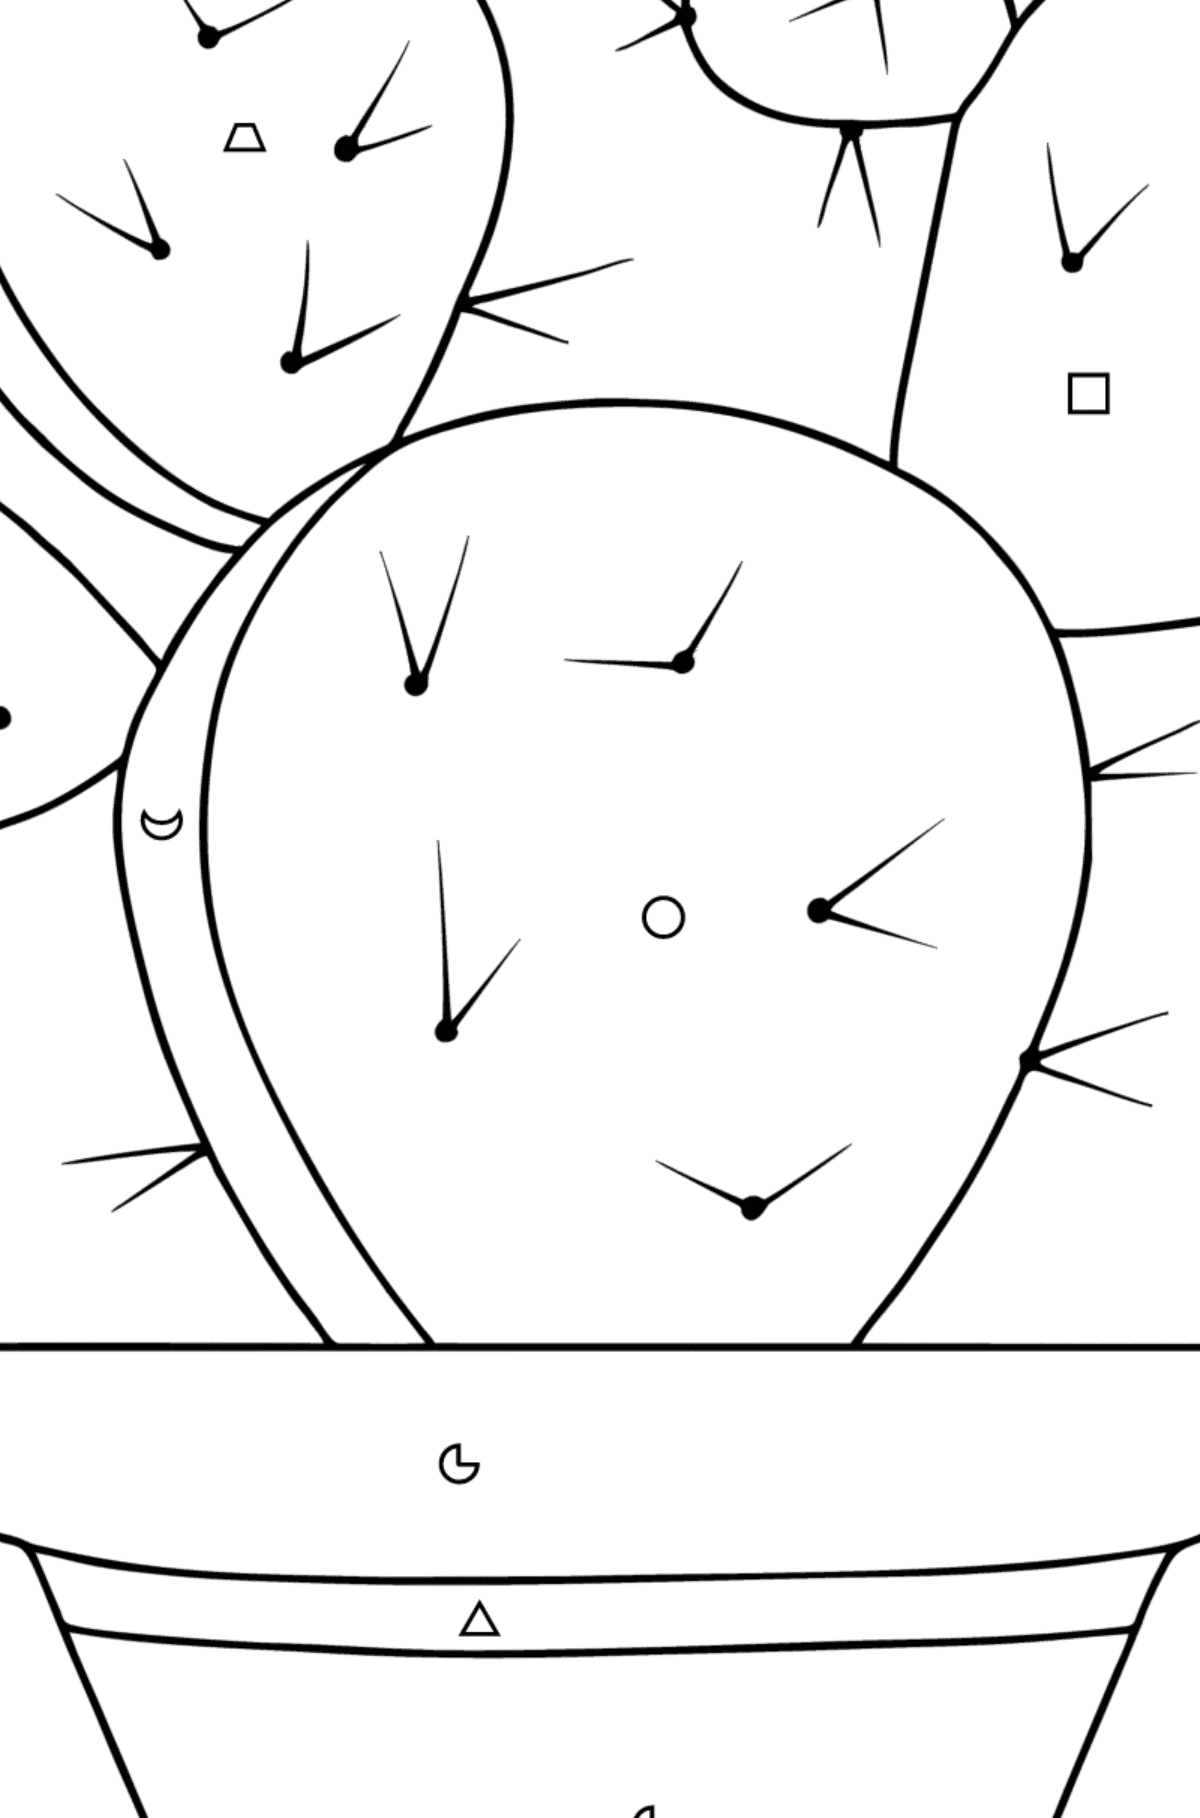 Prickly pear Cactus coloring page - Coloring by Geometric Shapes for Kids